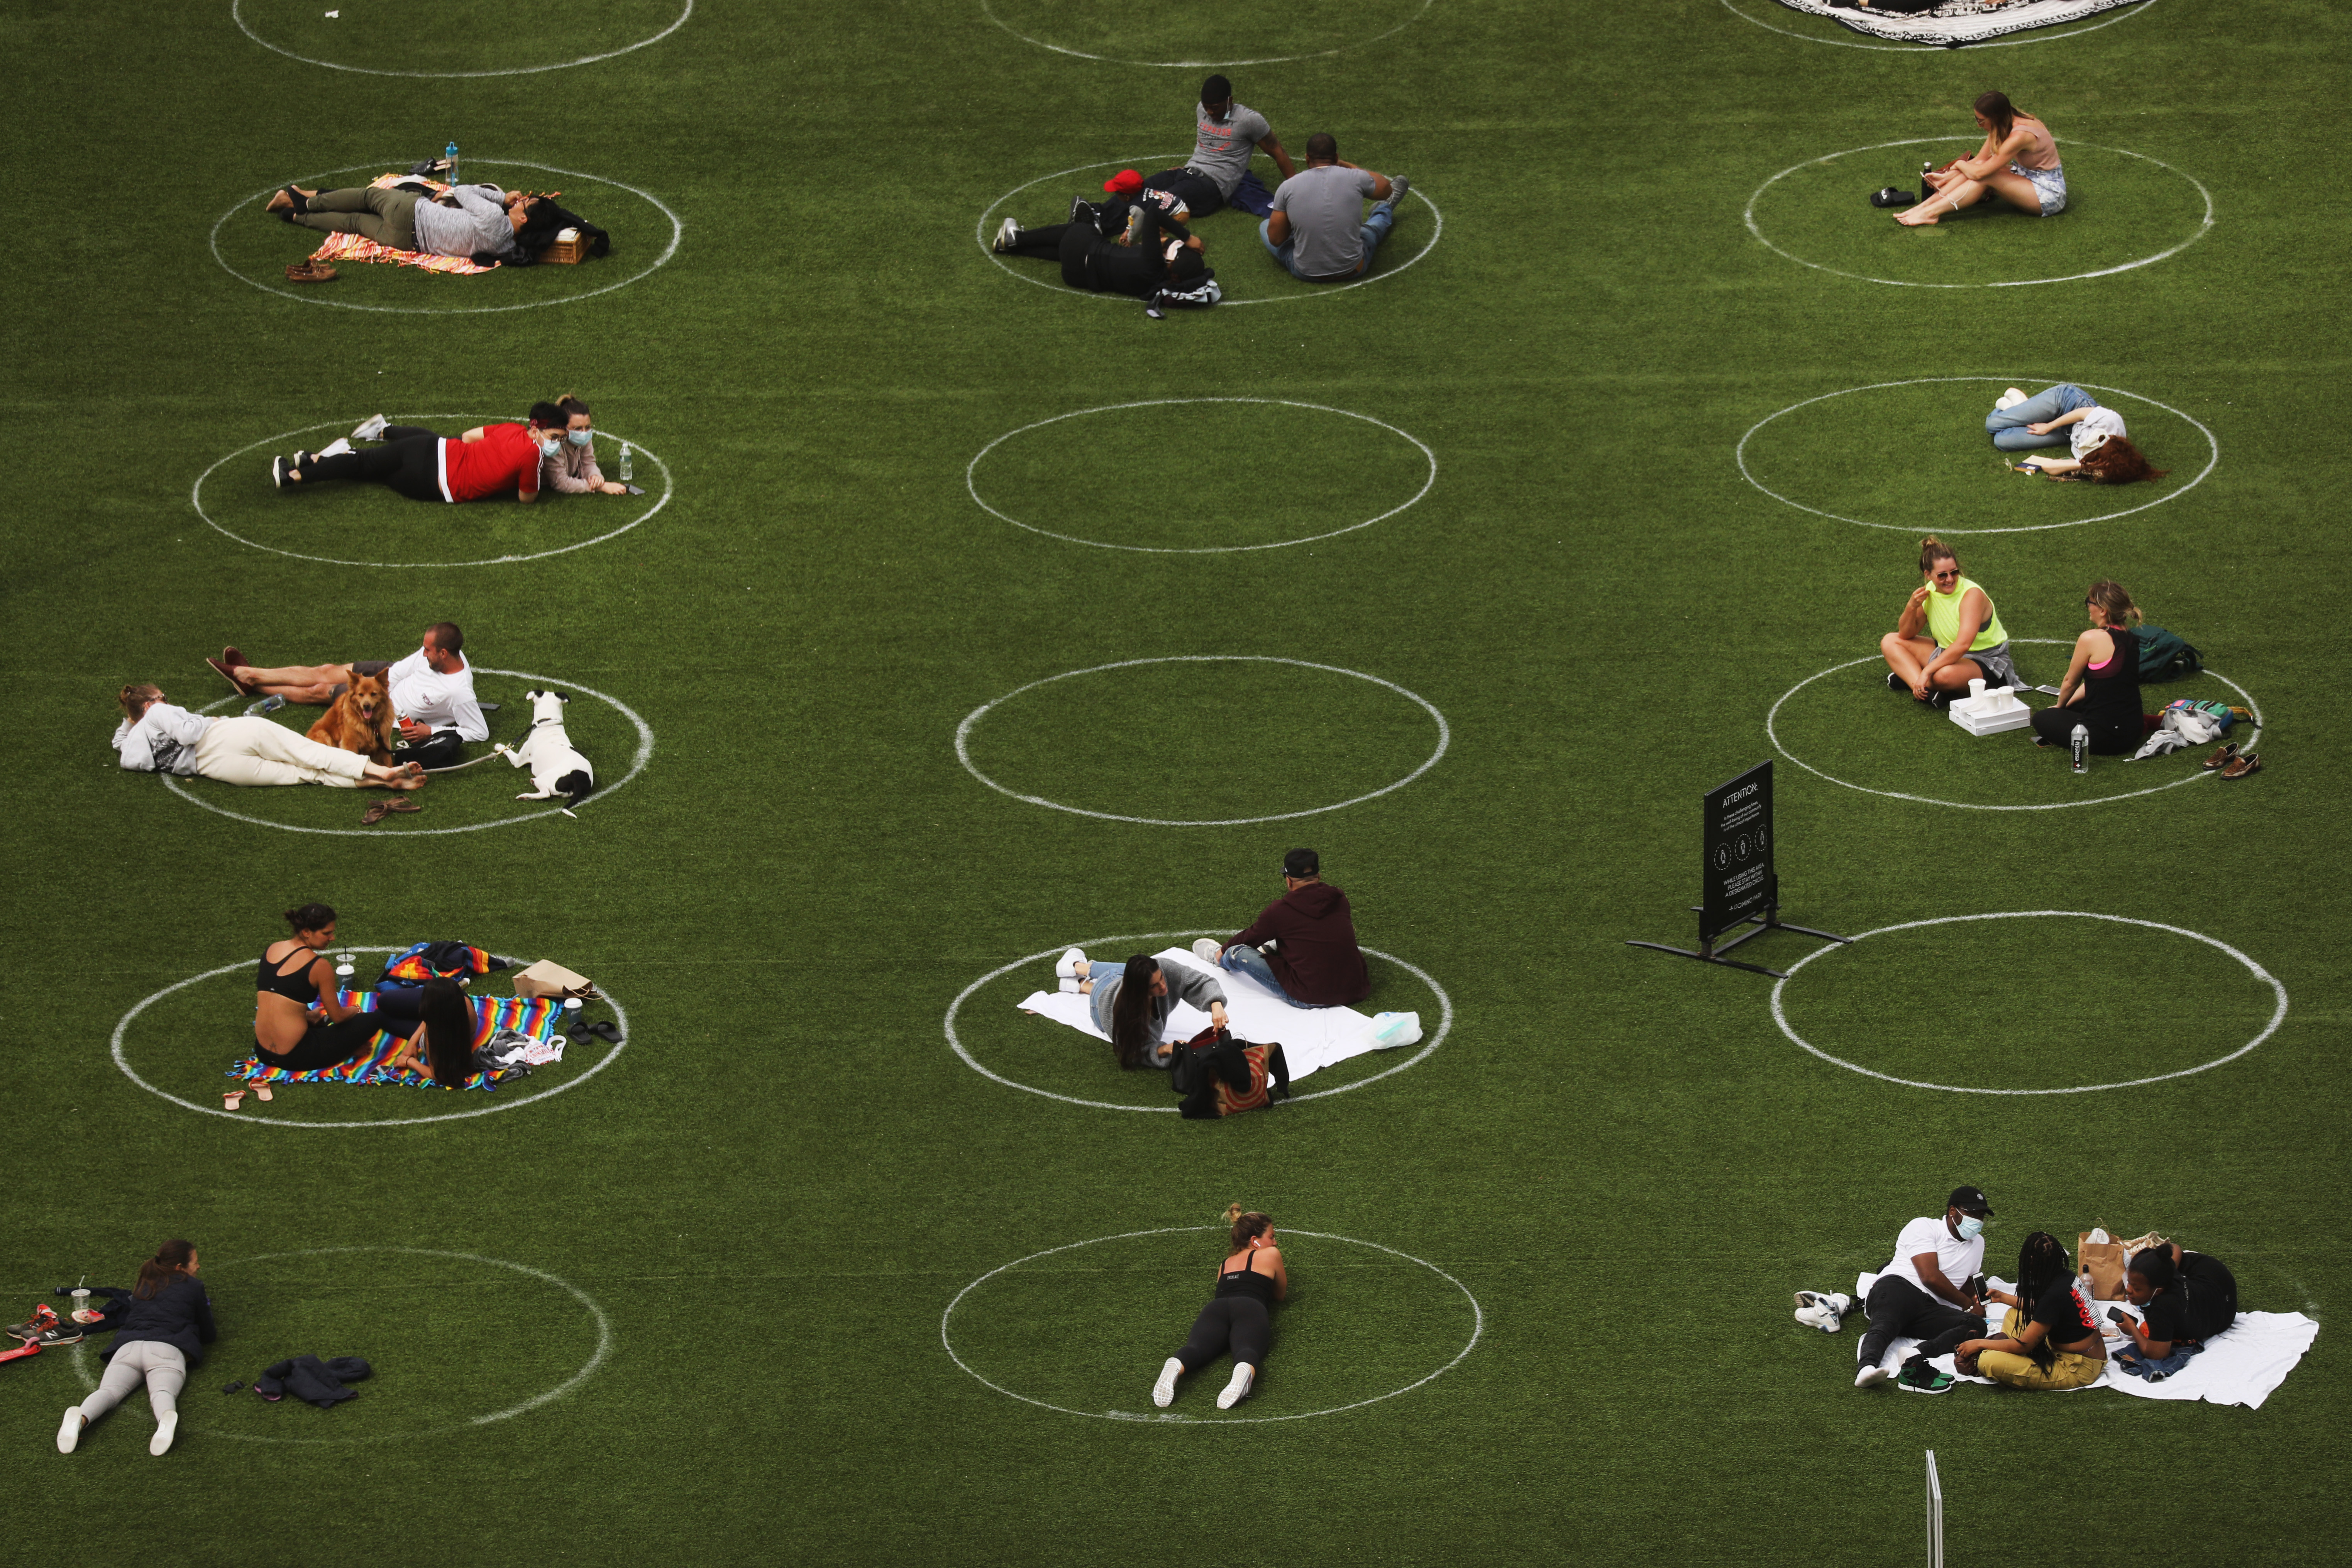 People sit in circles meant to encourage social distancing during the coronavirus pandemic in Domino Park along the East River on May 18, 2020 in the Williamsburg neighborhood of the Brooklyn borough in New York City. 